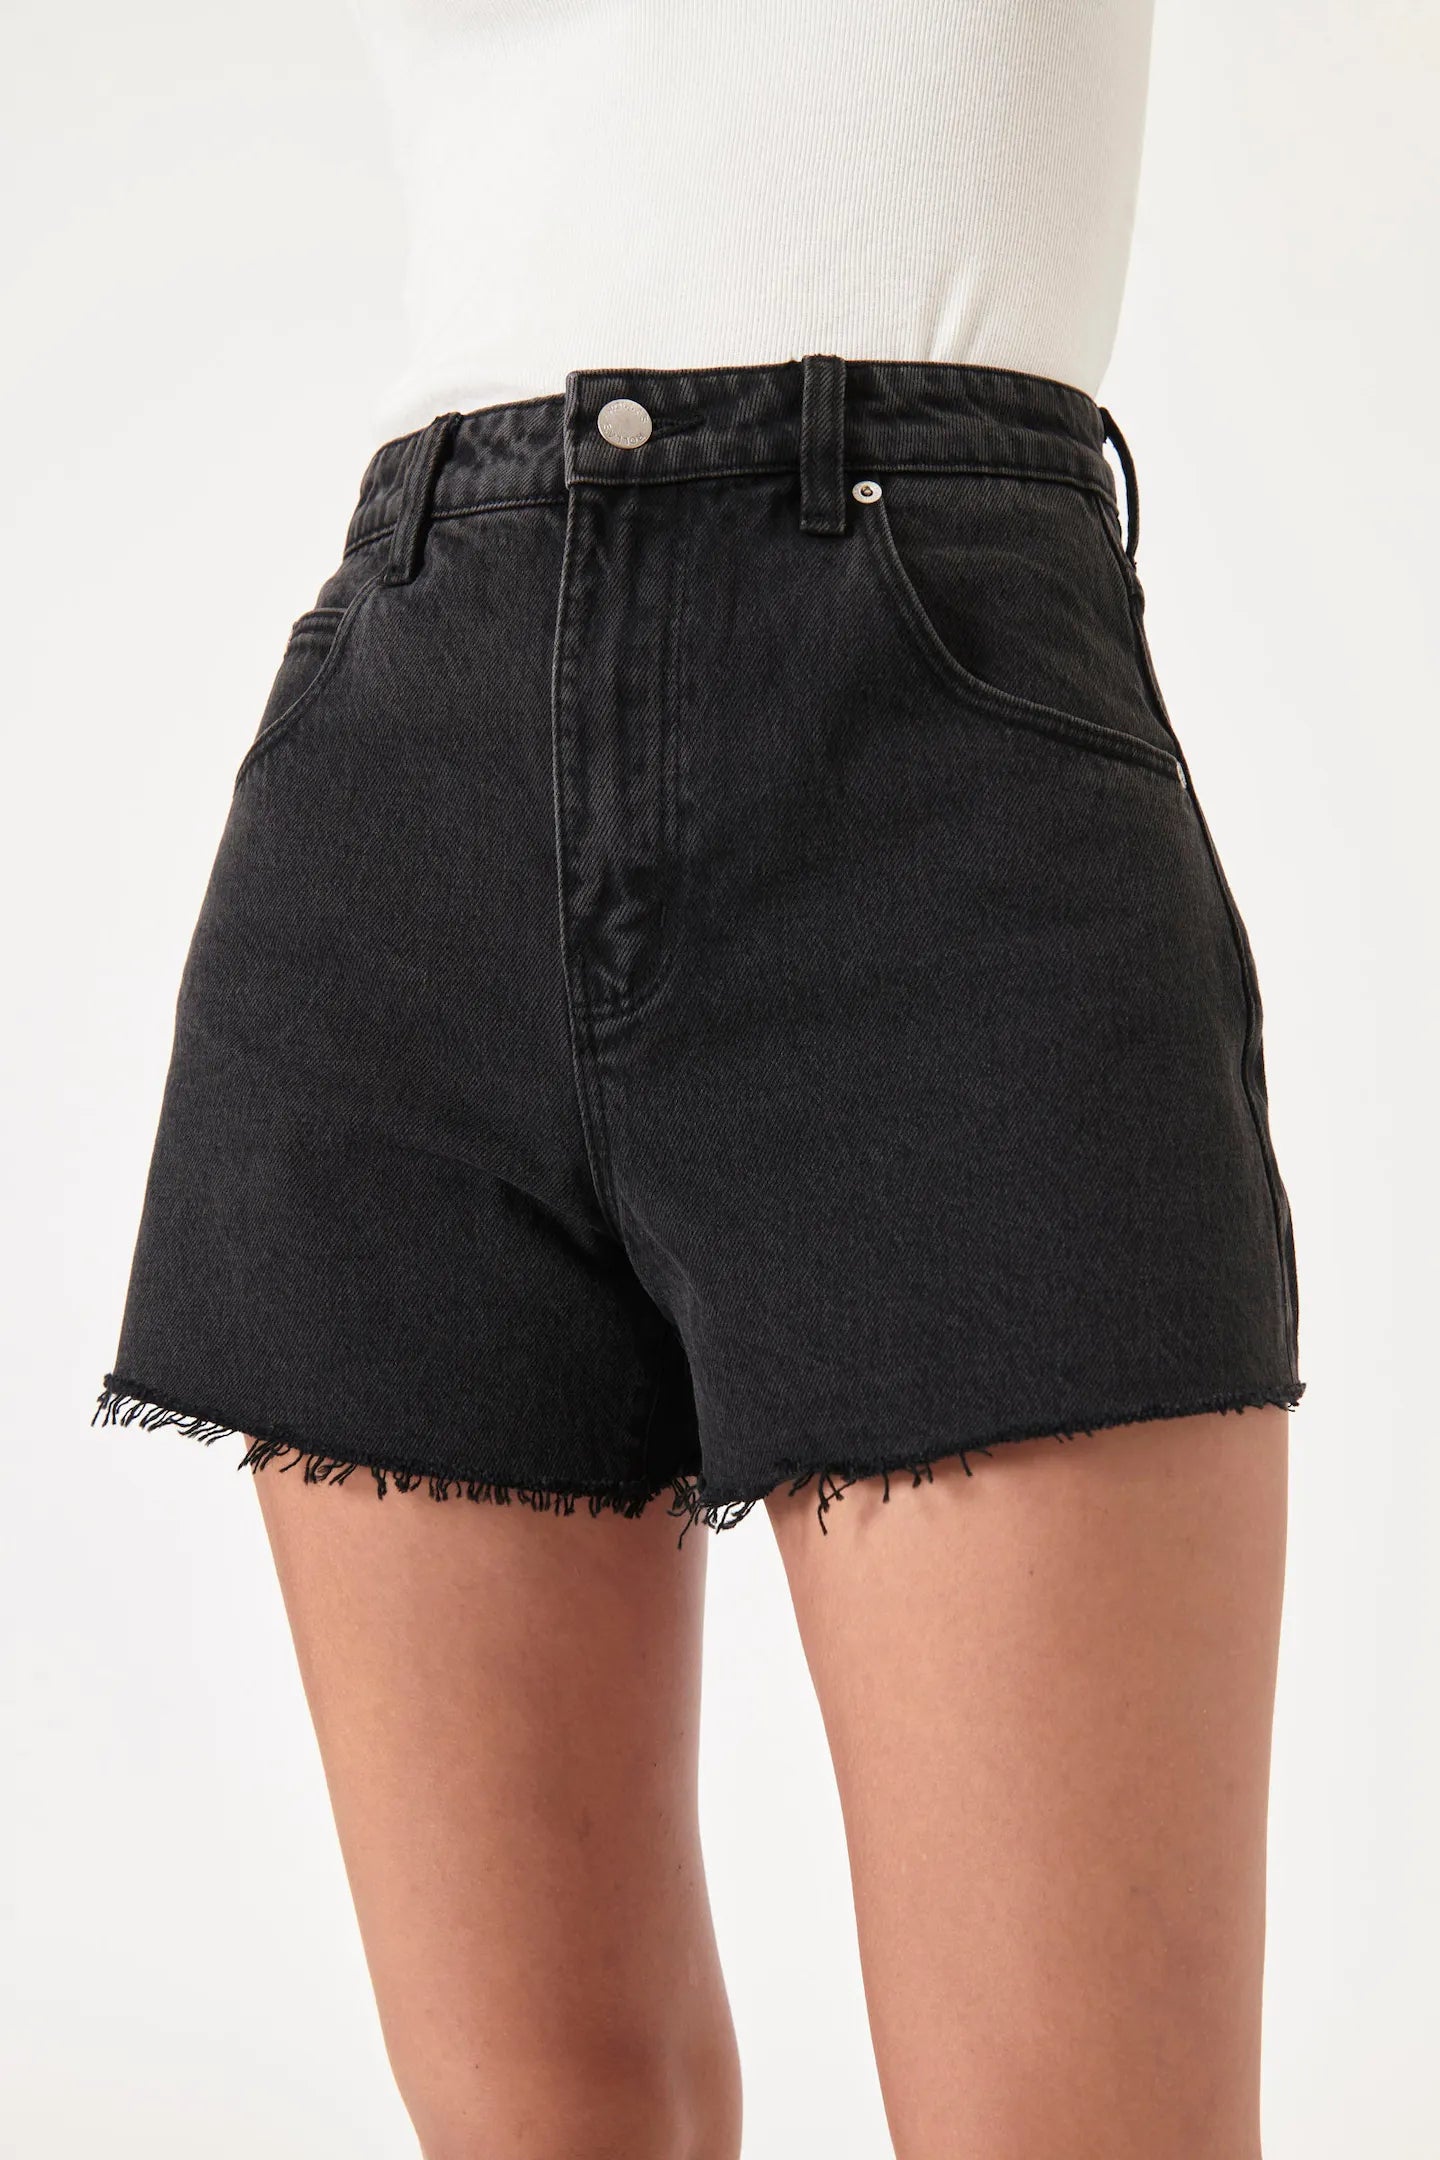 Rollas Mirage Shorts in Stone Black